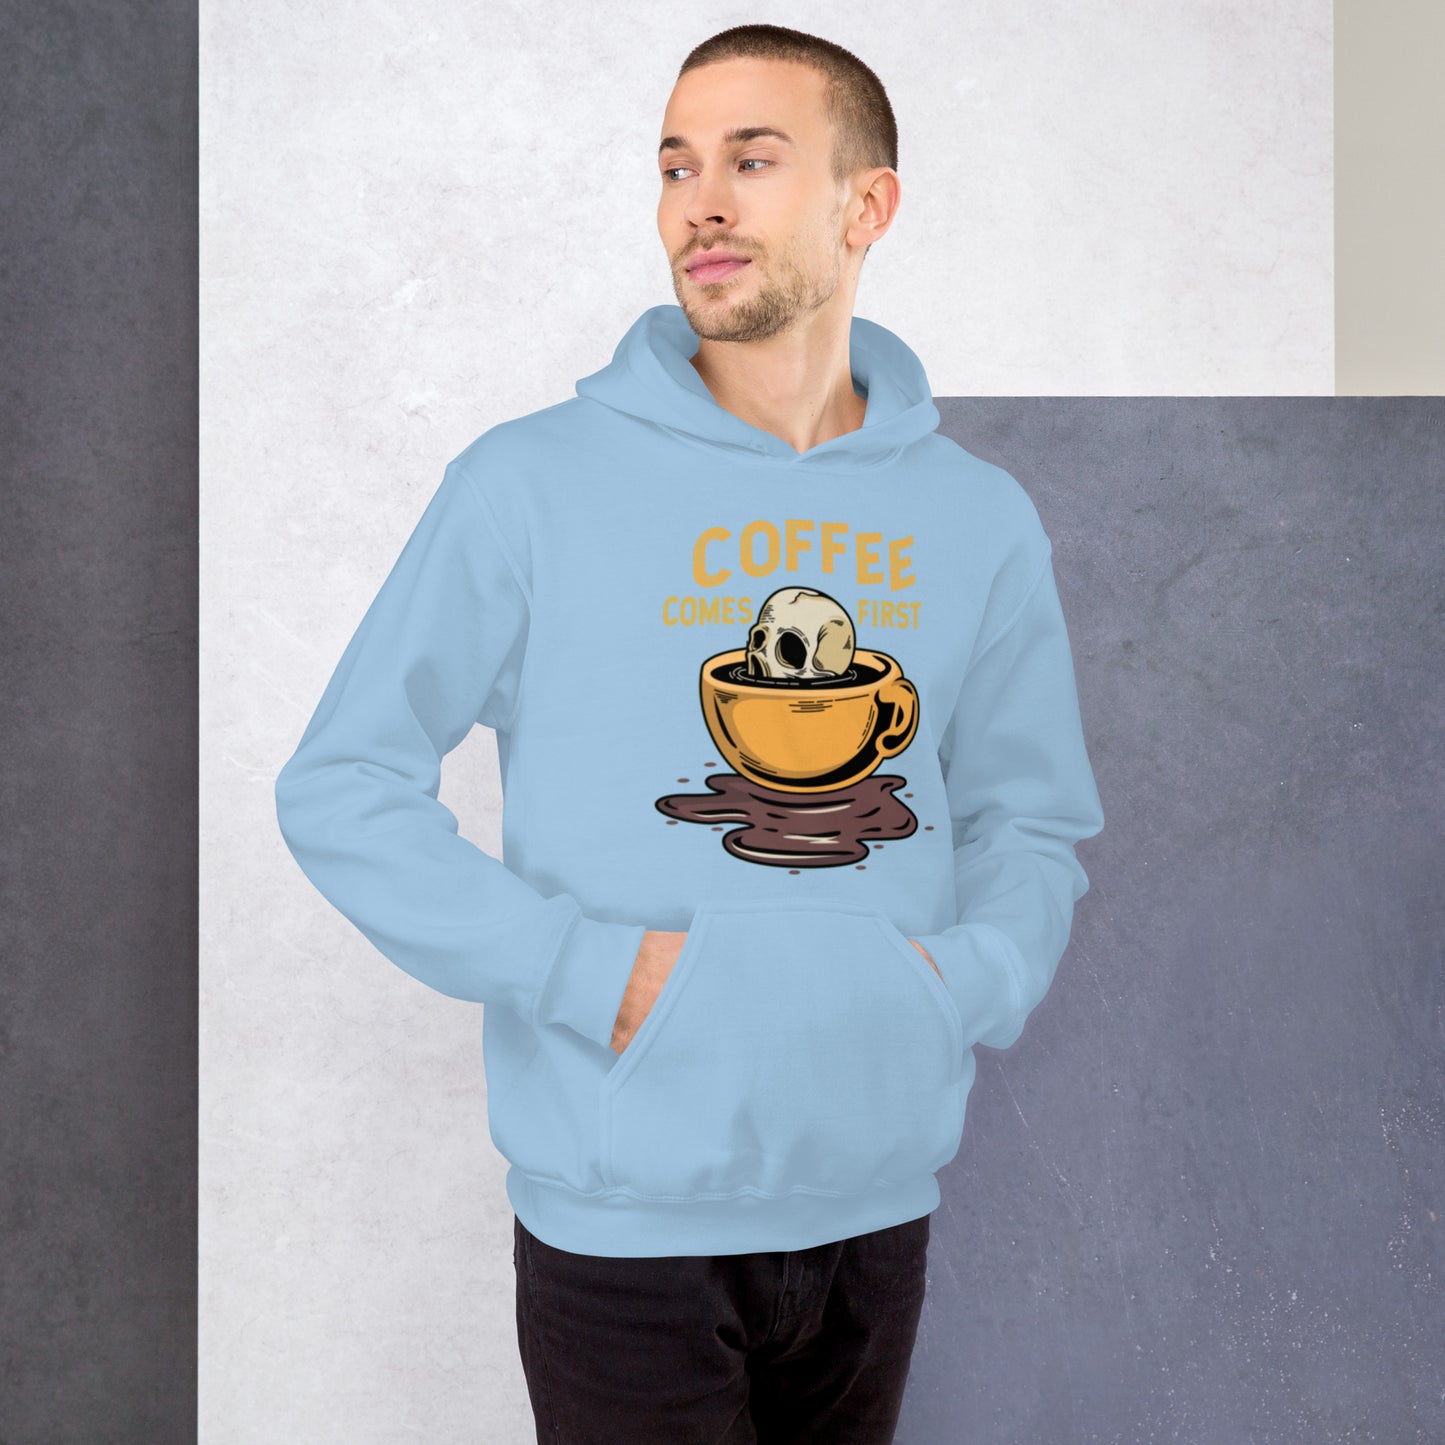 Coffee Comes First Unisex Hoodie